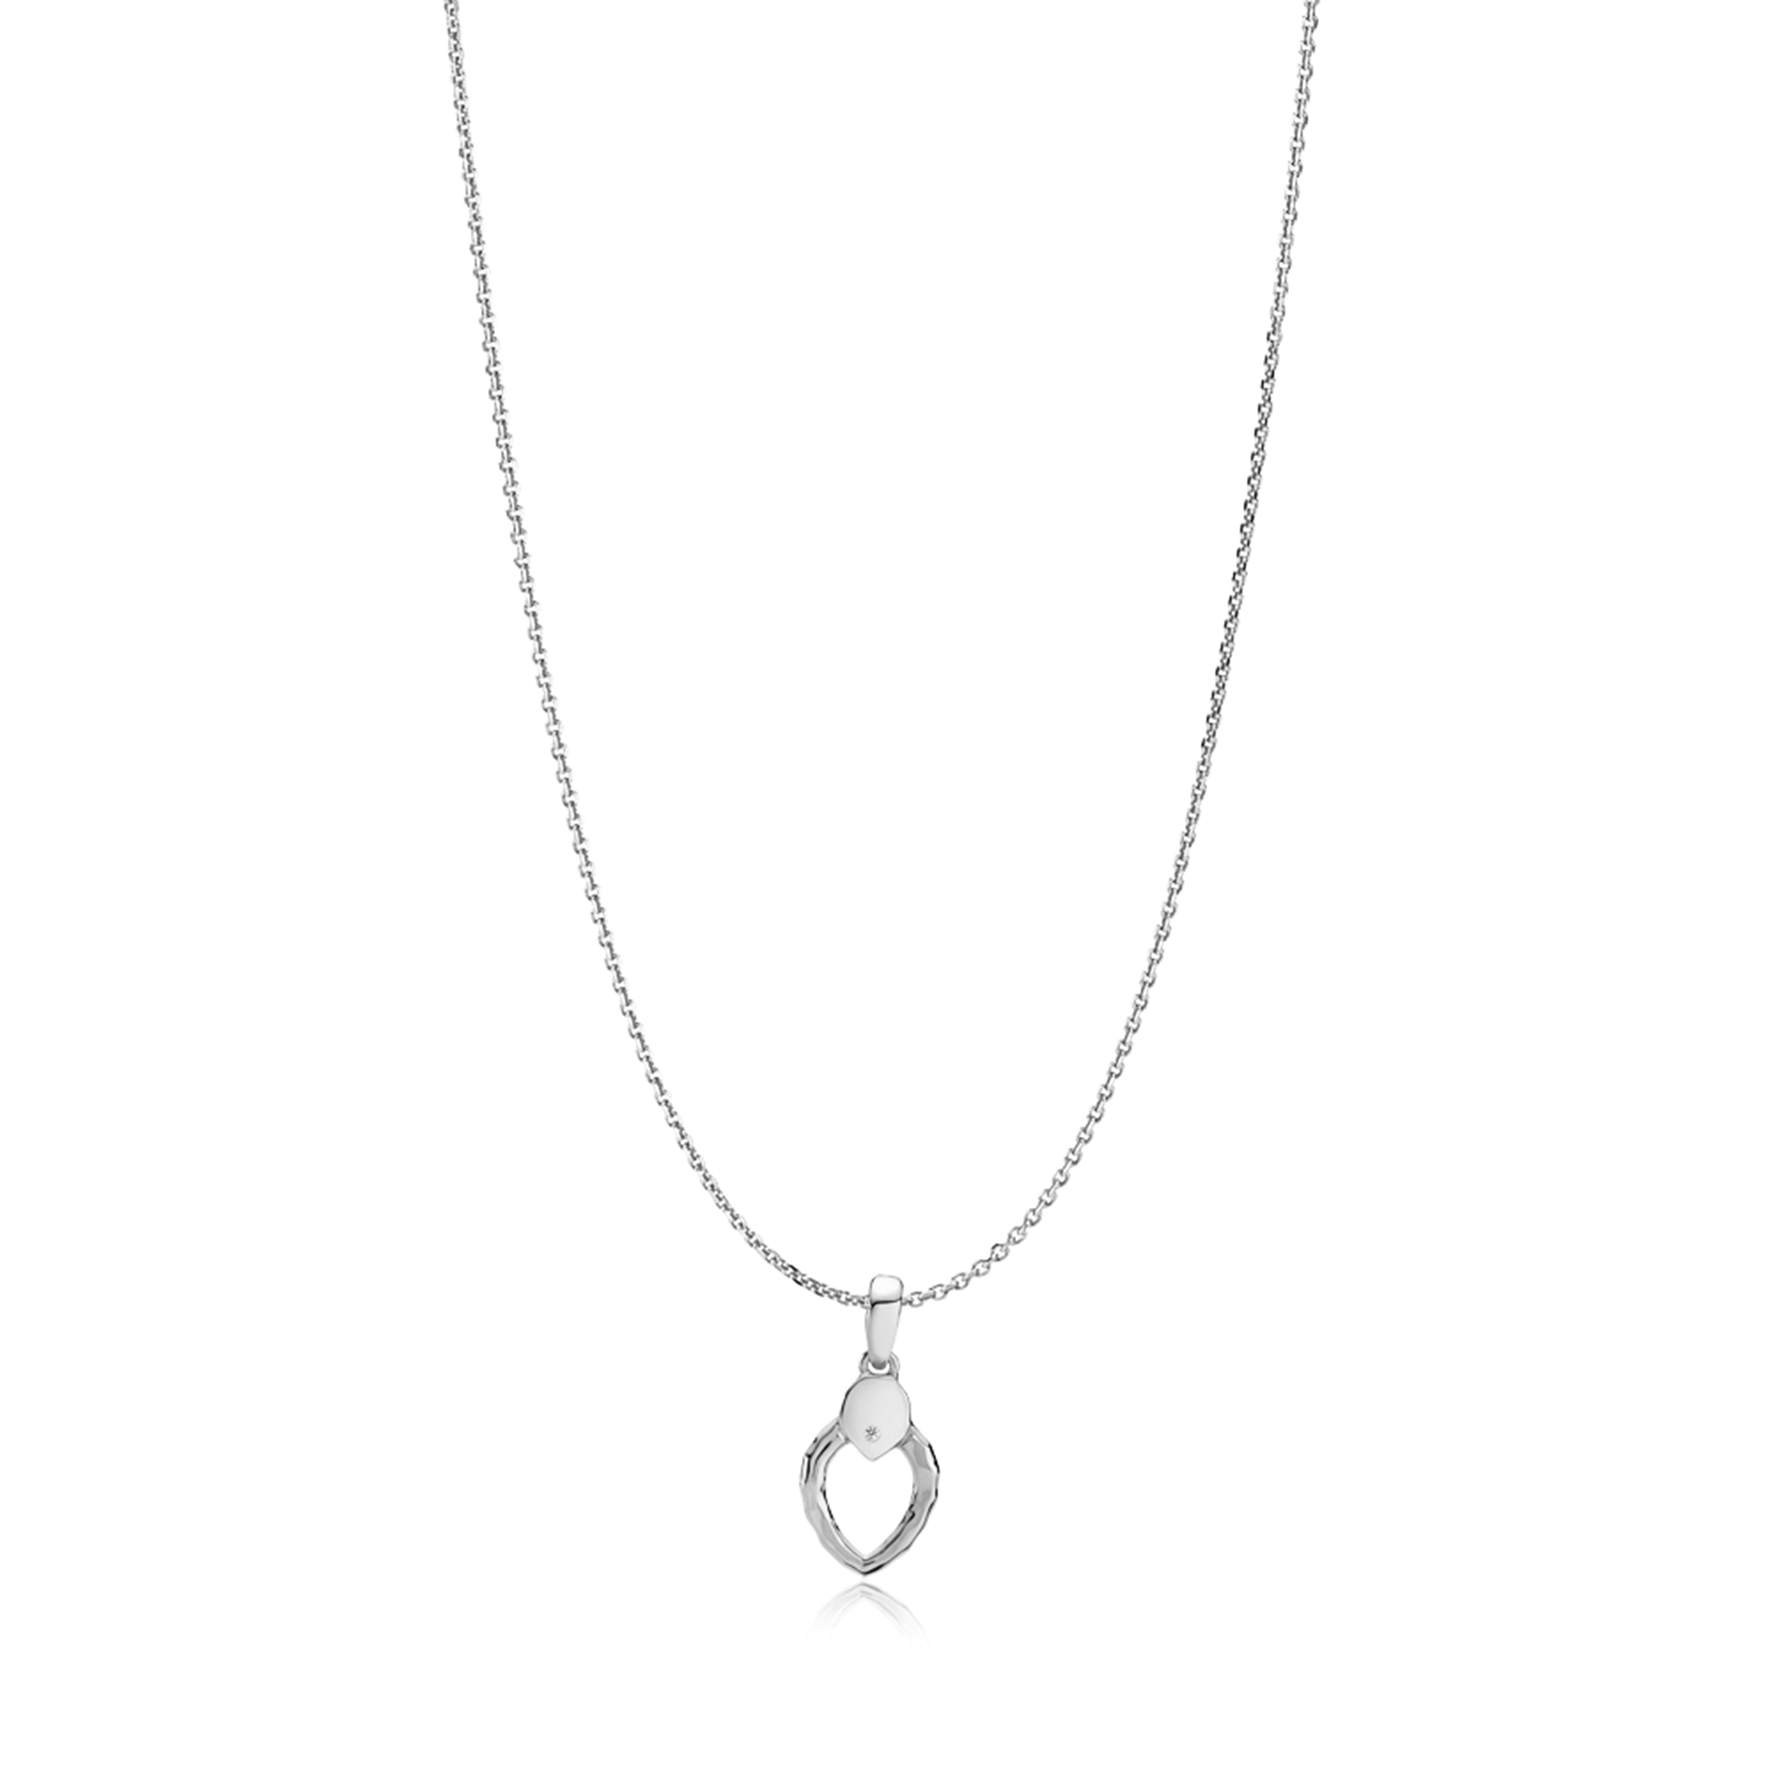 Cecilie Schmeichel Necklace from Izabel Camille in Silver Sterling 925